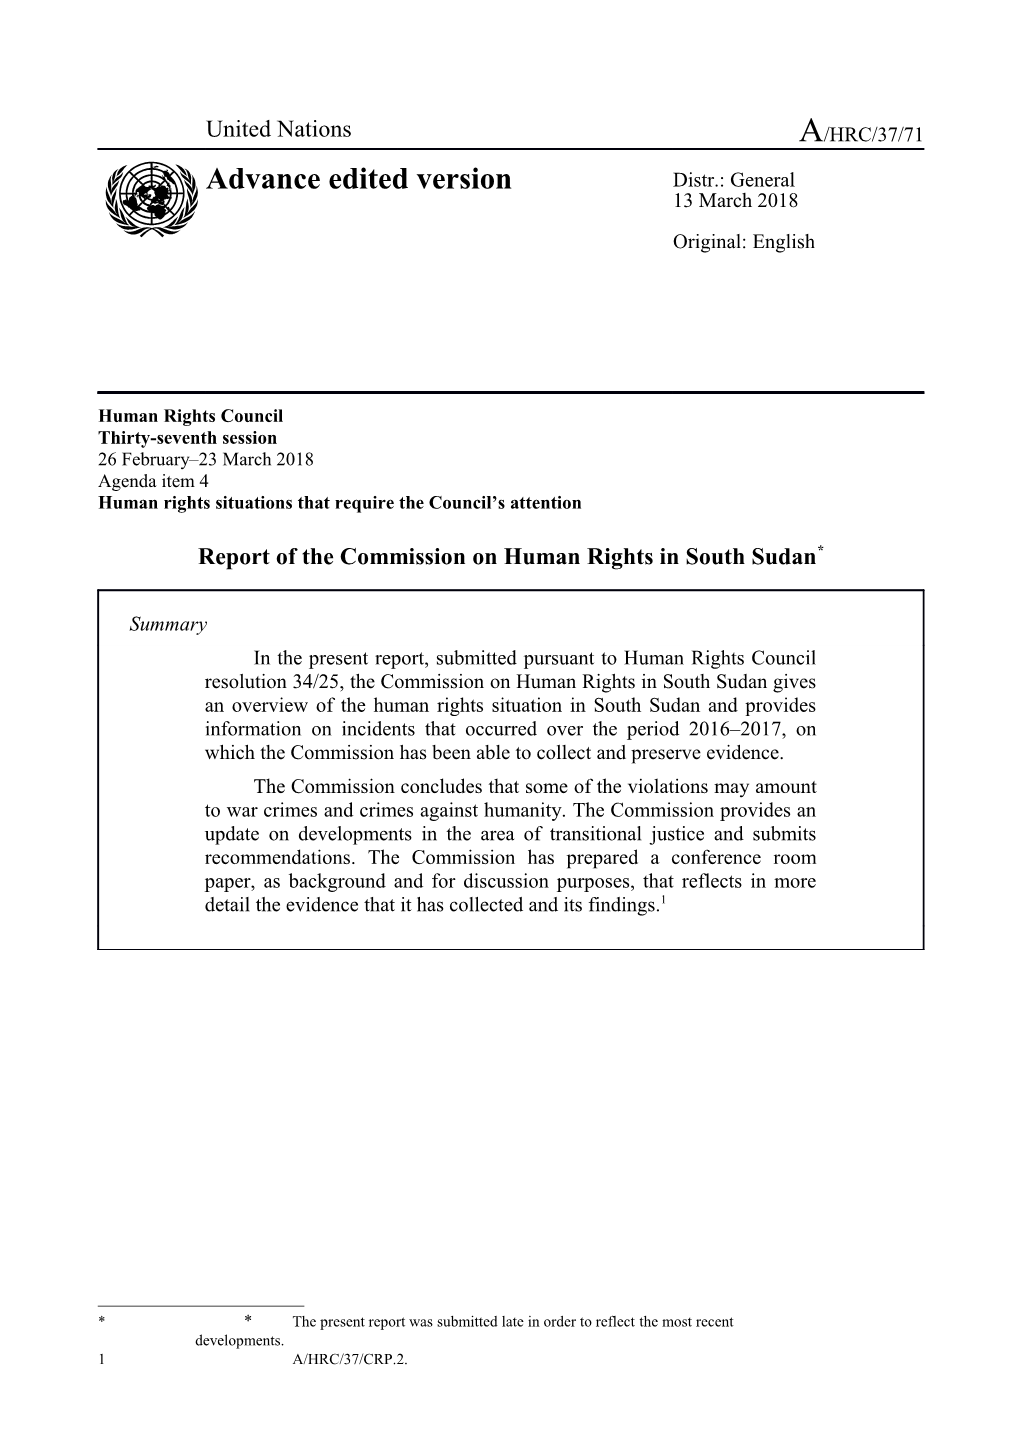 Report of the Commission on Human Rights in South Sudan